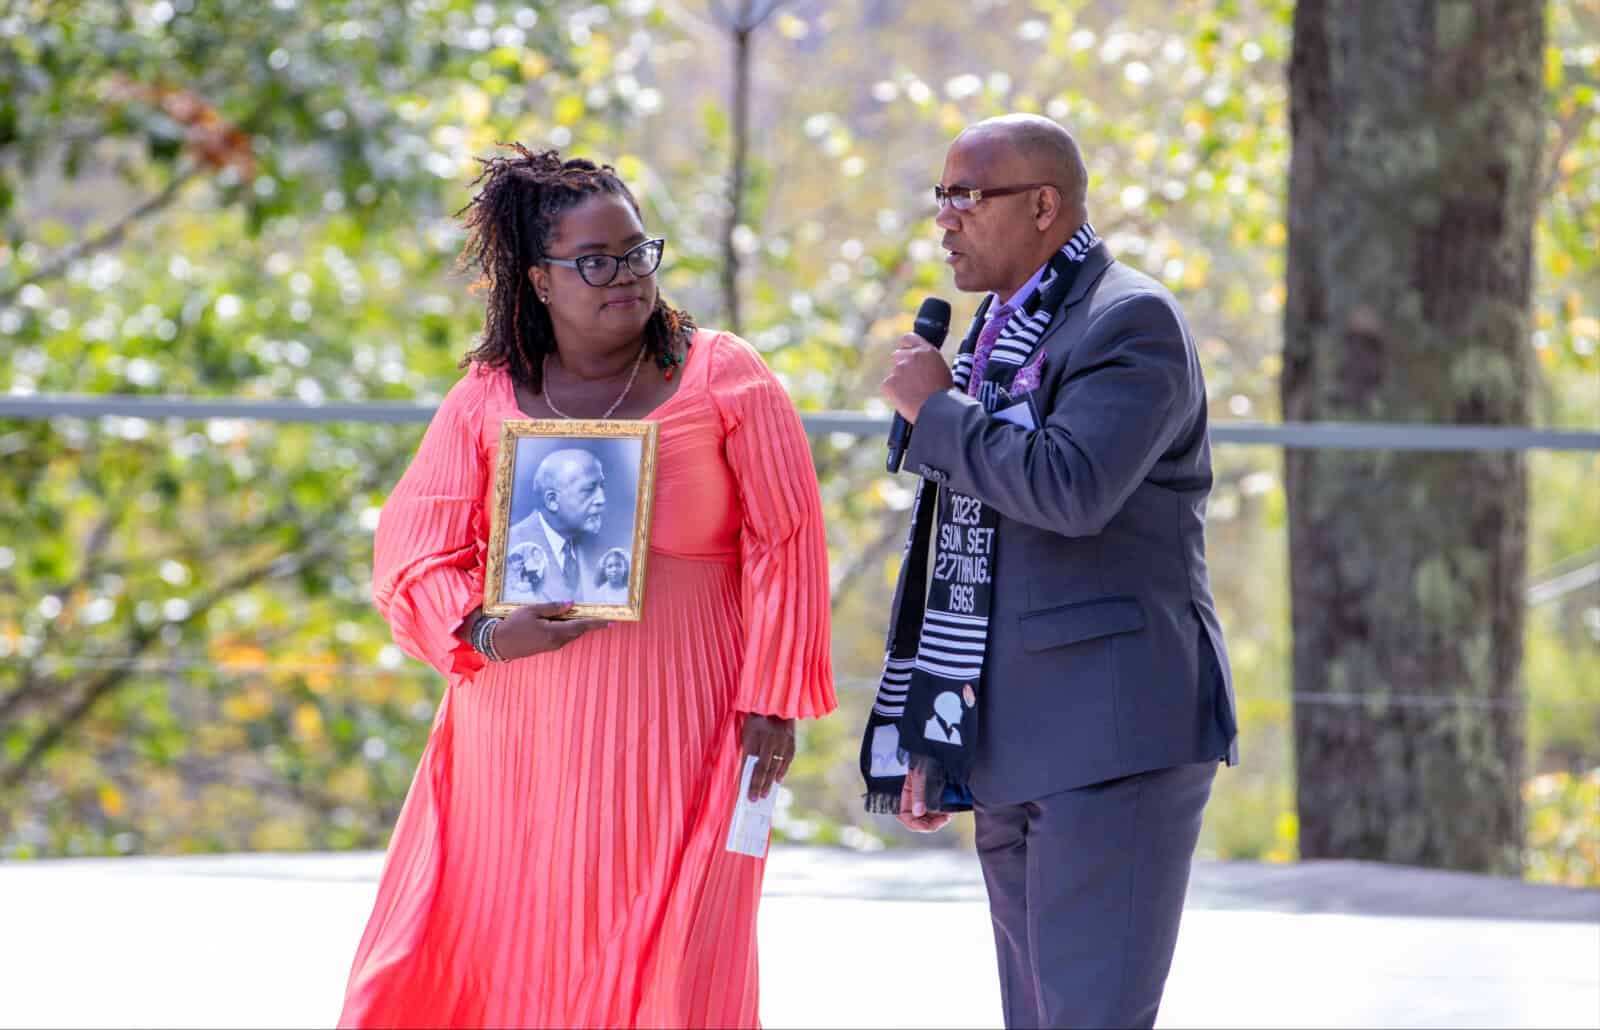 Jeffrey Allen Peck, great grandson of W.E.B. DuBois, gives a photograph of his family to Gwendolyn Van Sant, founder of BRIDGE, on the outdoor stage at Jacob's Pillow. Press photo courtesy of BRIDGE